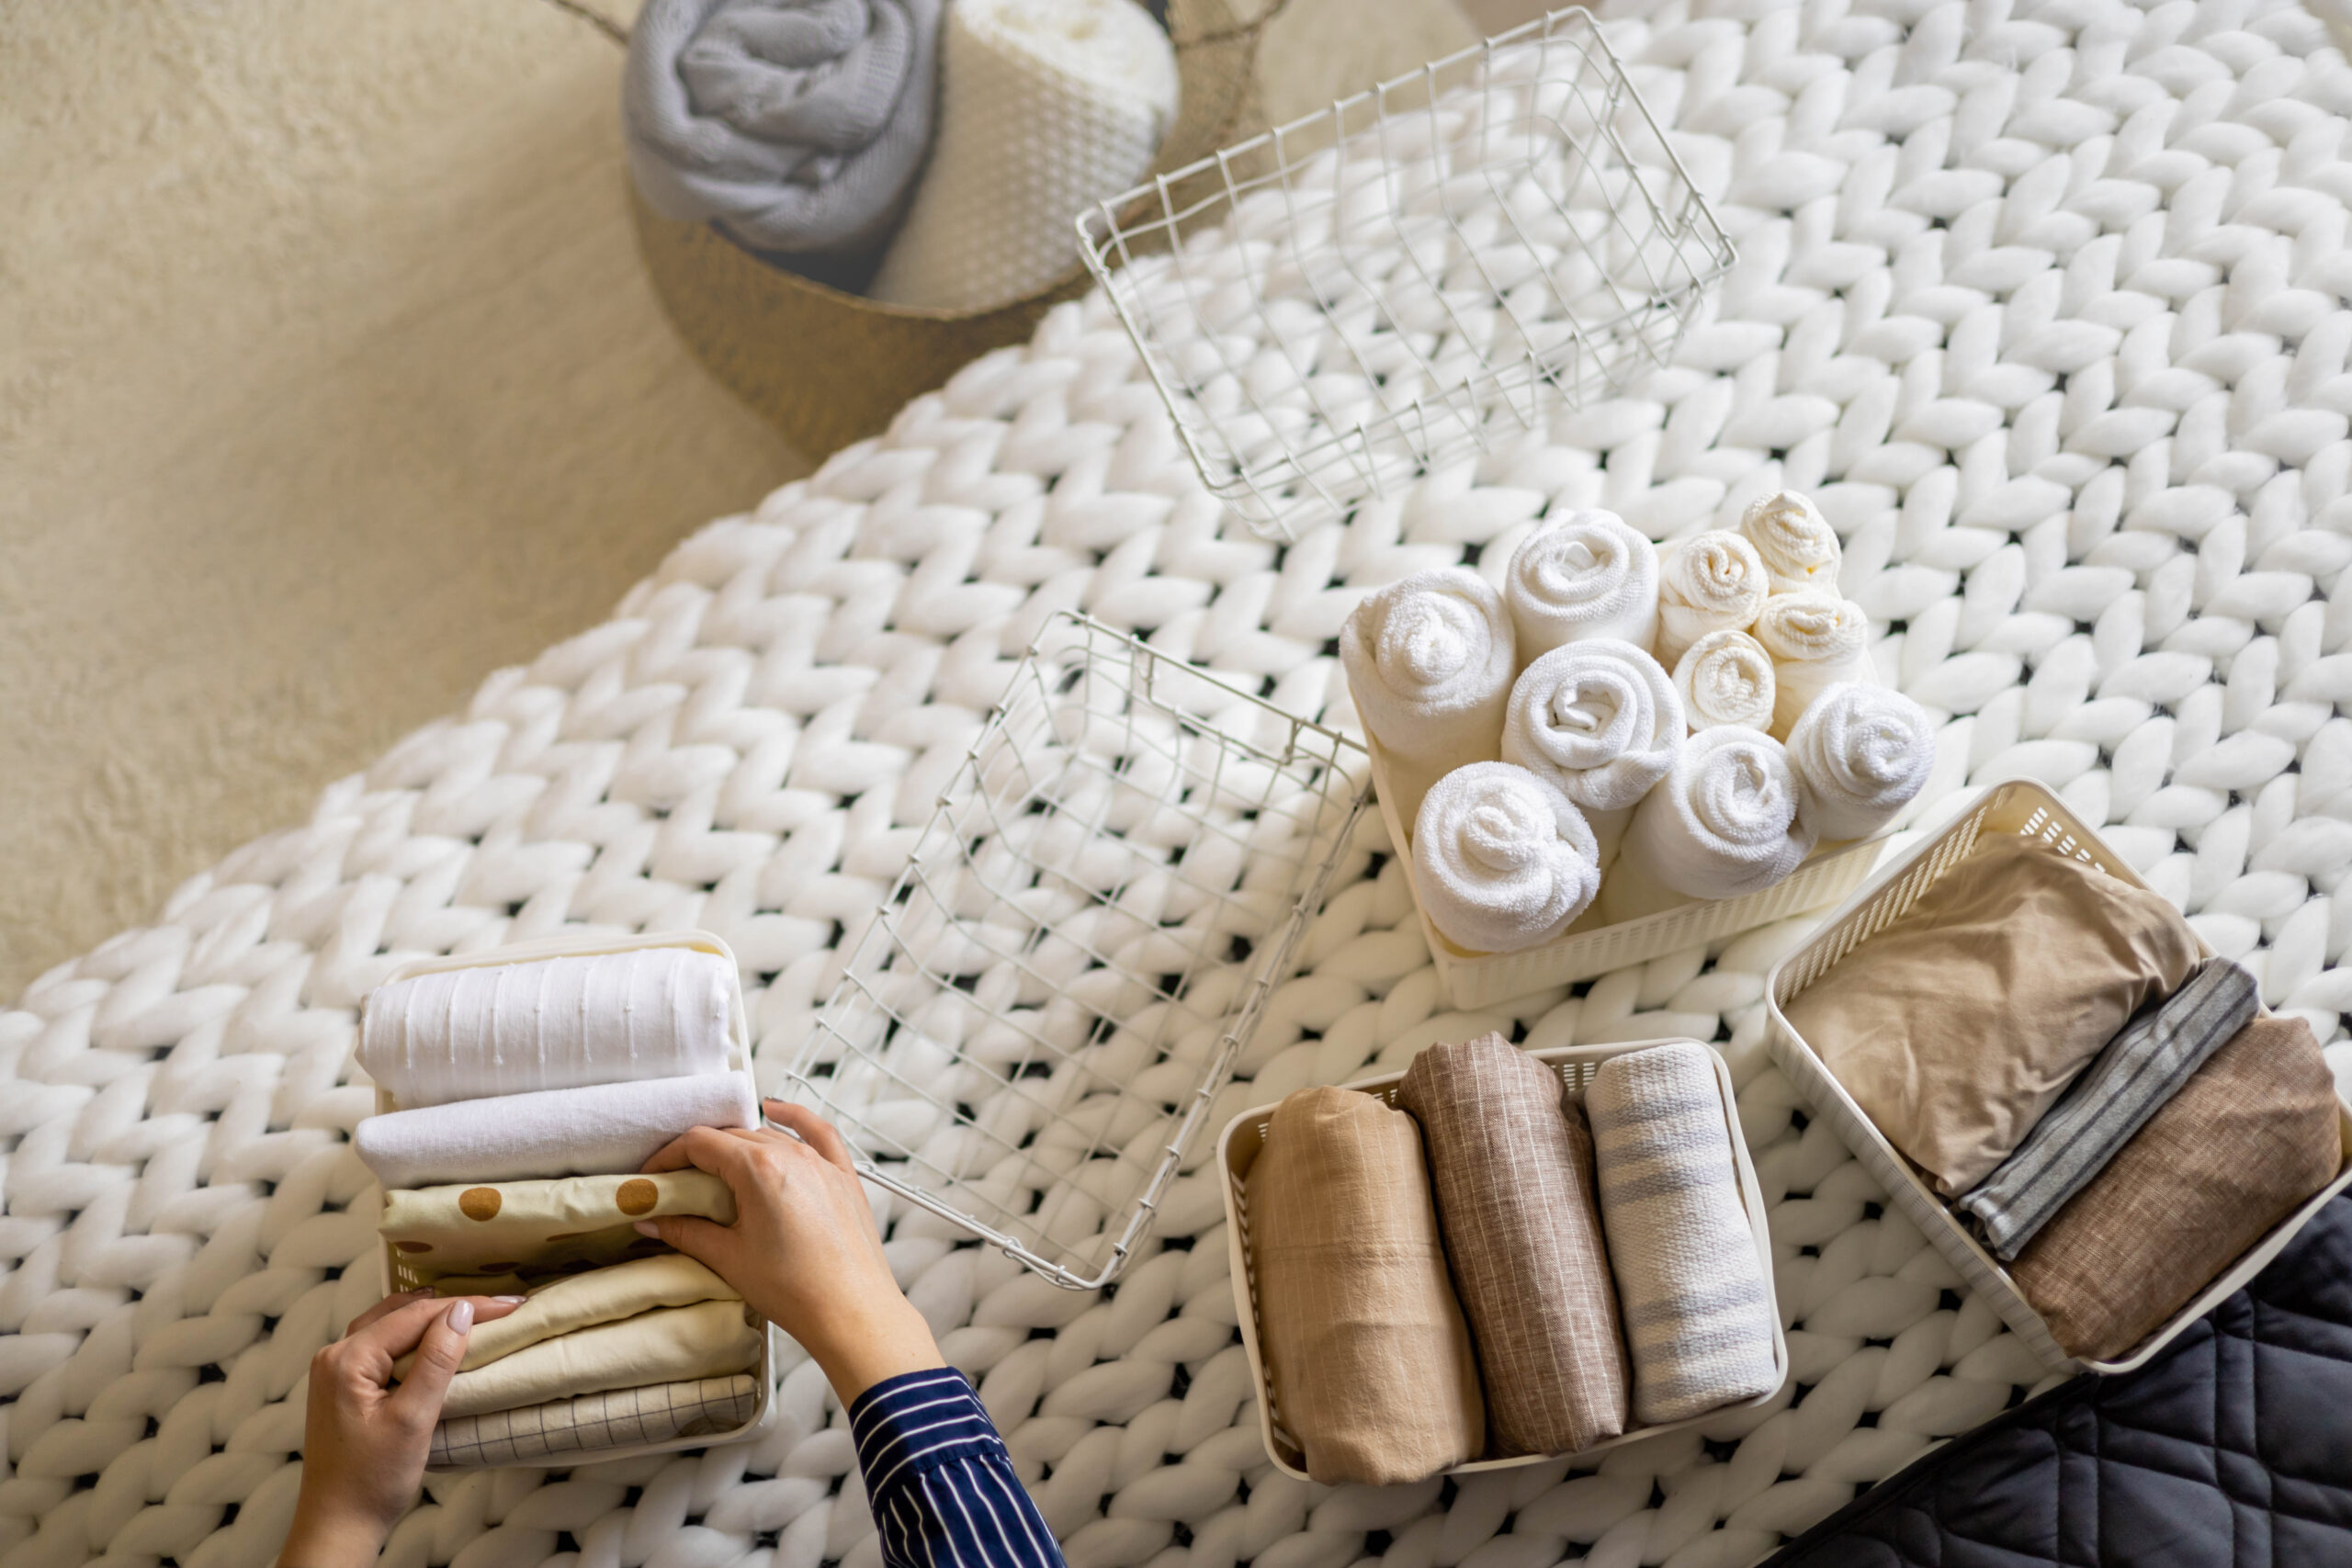 Discover effective tips on how to get organized after the busy holiday season. This guide provides practical steps for decluttering, cleaning, setting goals, and more to help you smoothly transition back into your everyday routine.